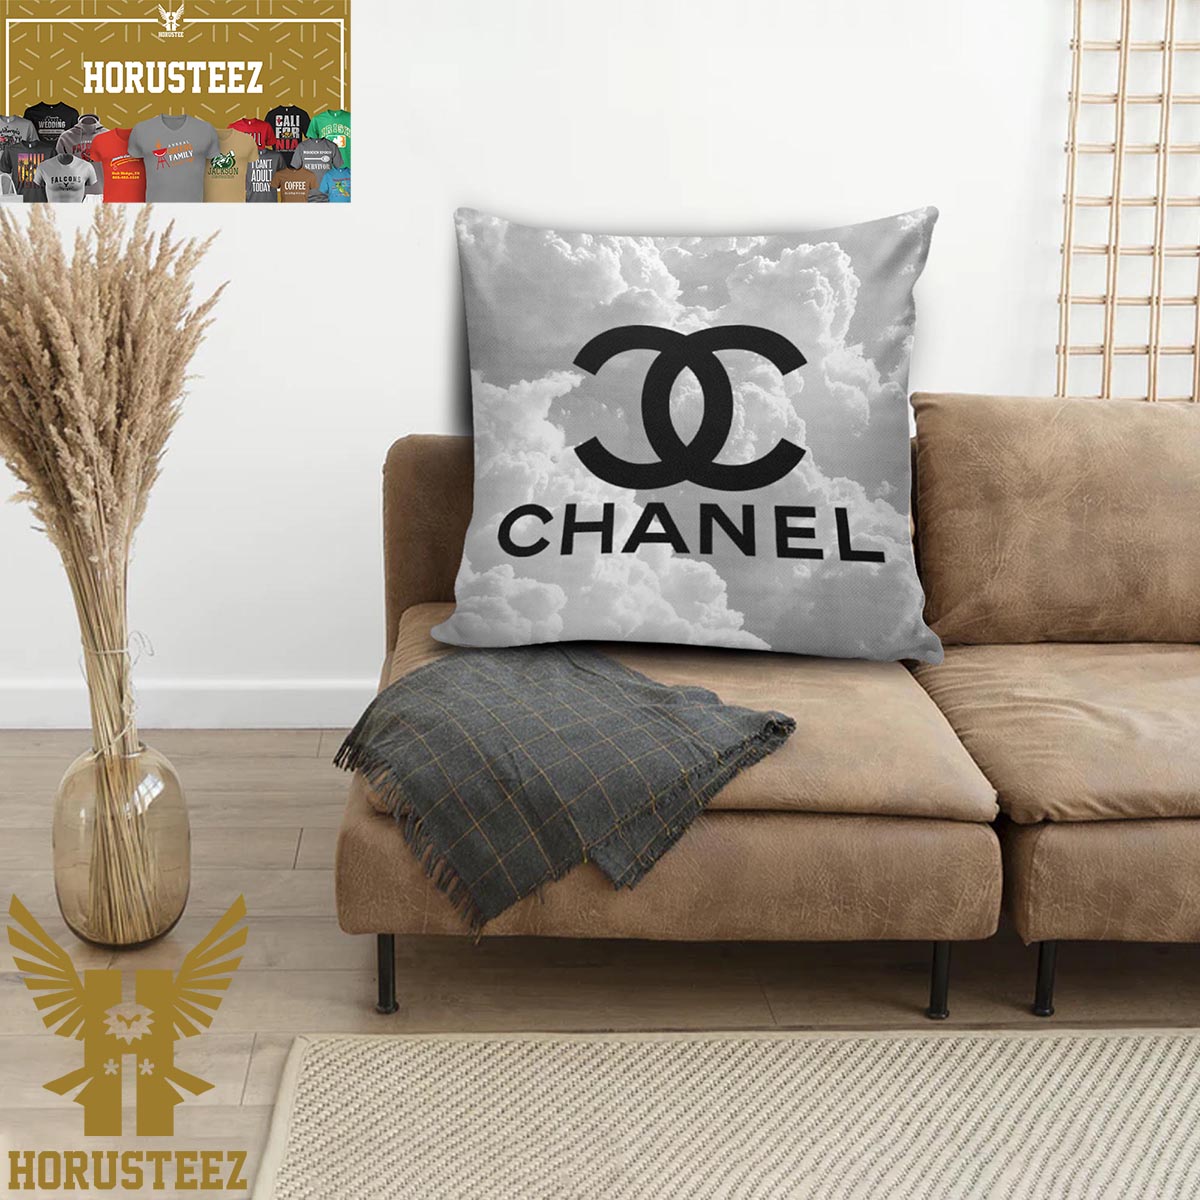 Chanel Signature Big Black Logo In The Chillin' Cloud Background Decor Throw Pillow